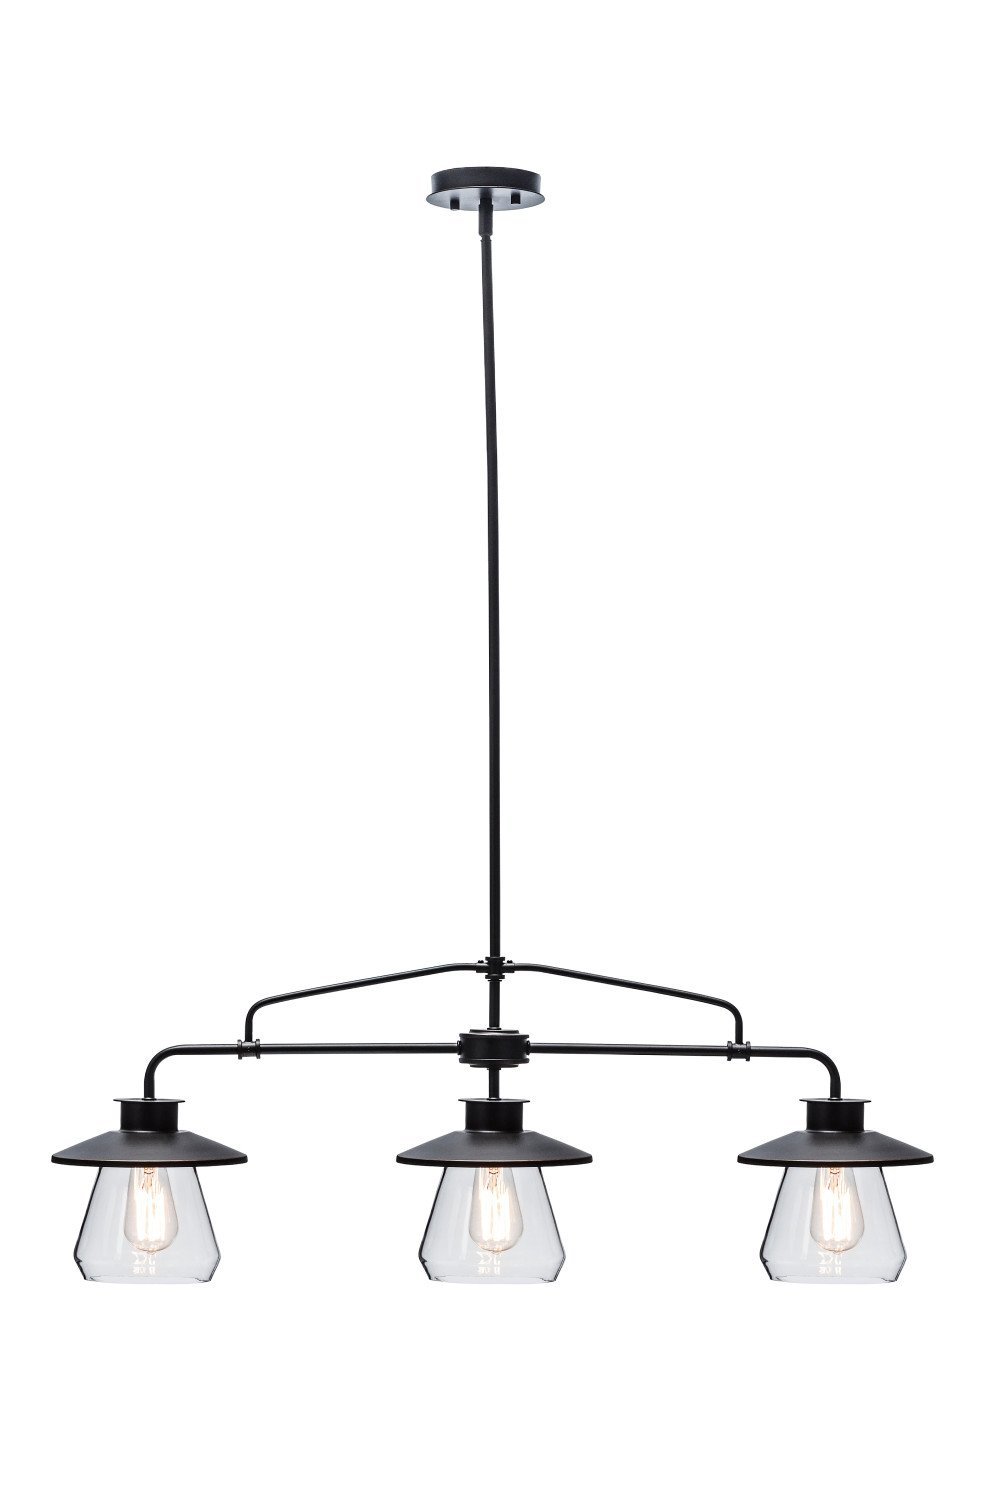 Globe Electric 3-Light Vintage Pendant, Oil Rubbed Bronze Finish, Clear Glass Shades, 64845